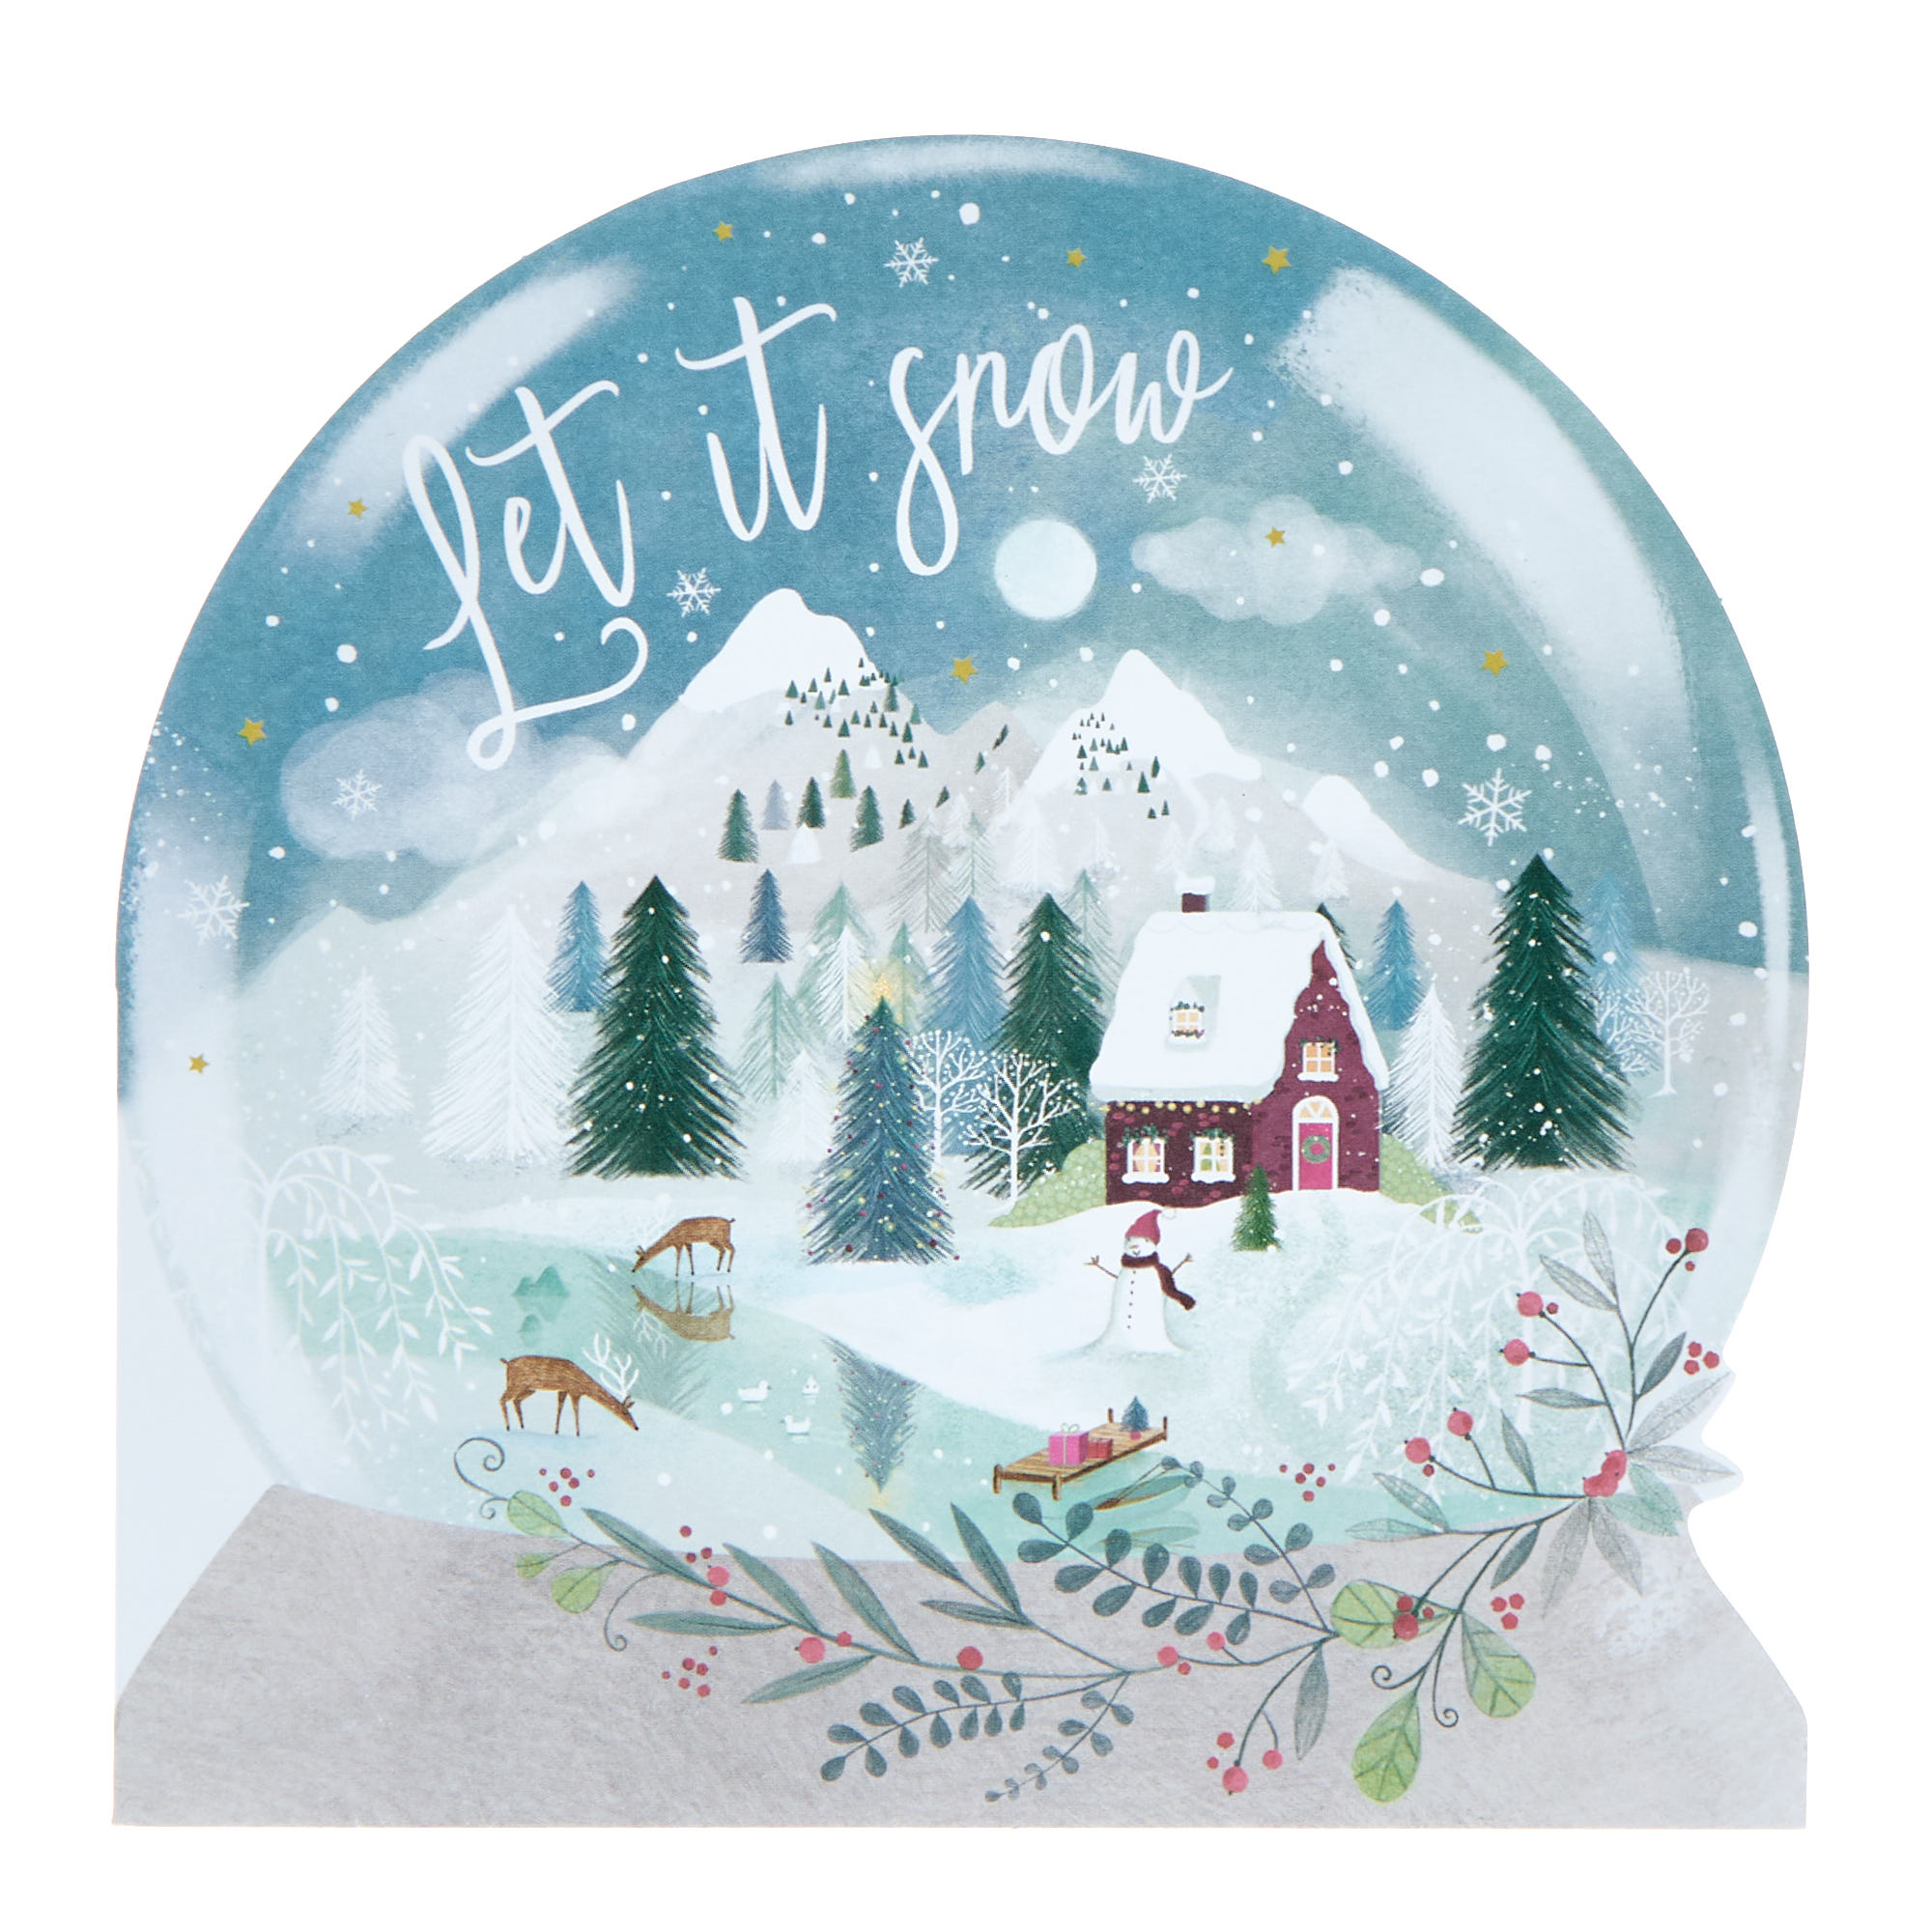 16 Charity Christmas Cards - Snow Globes (2 Designs)